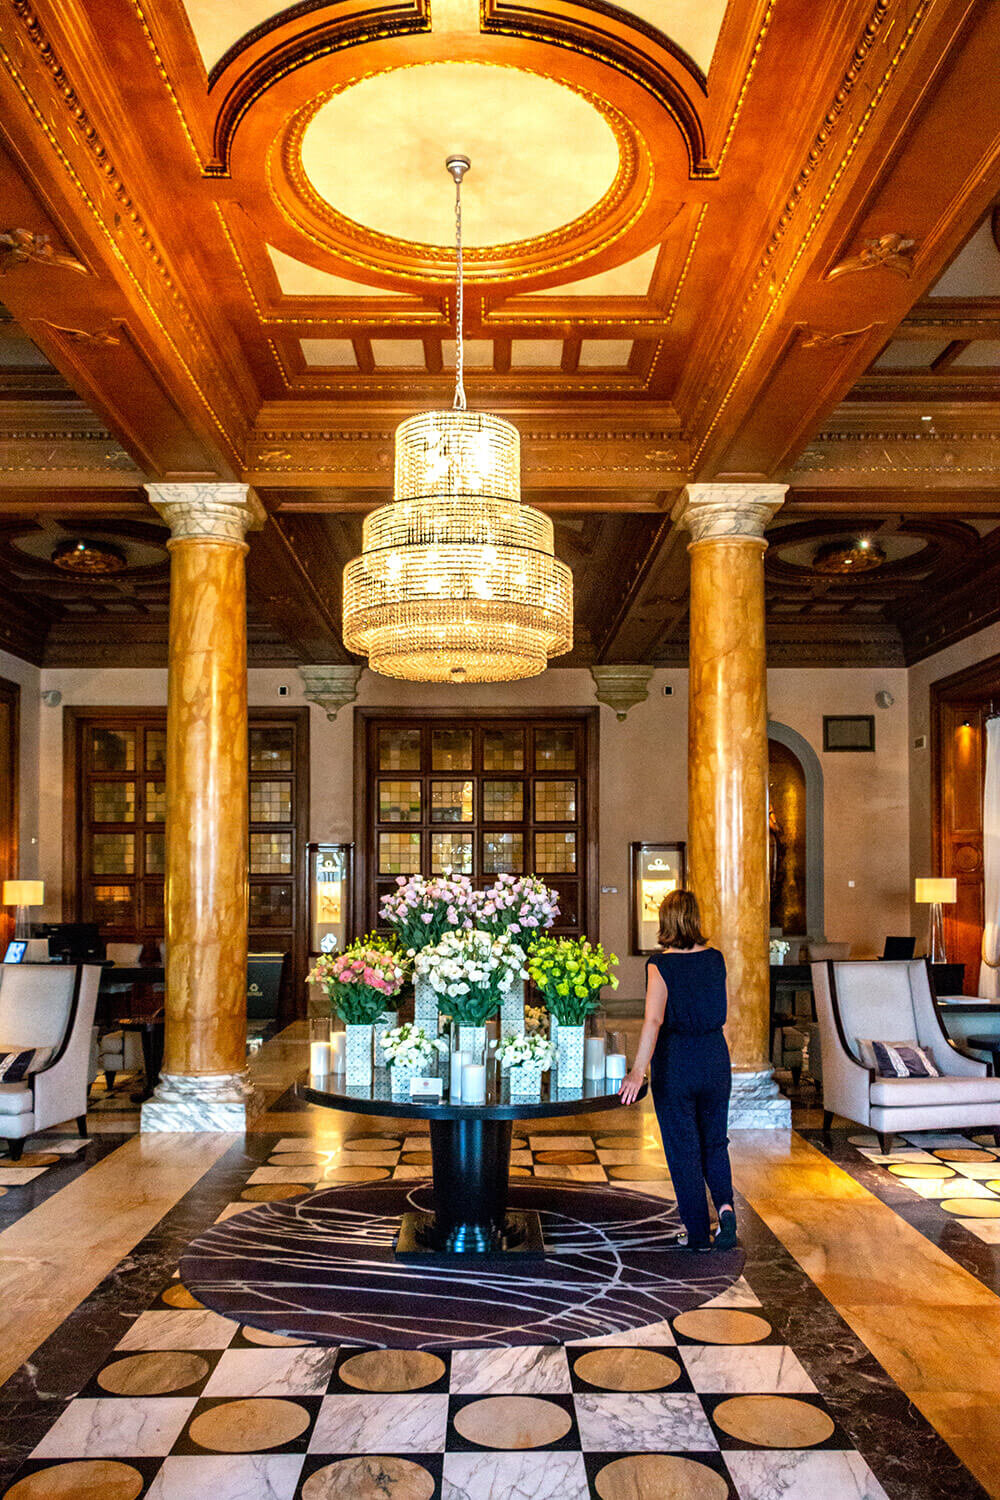 The stunning lobby of the Westin Excelsior